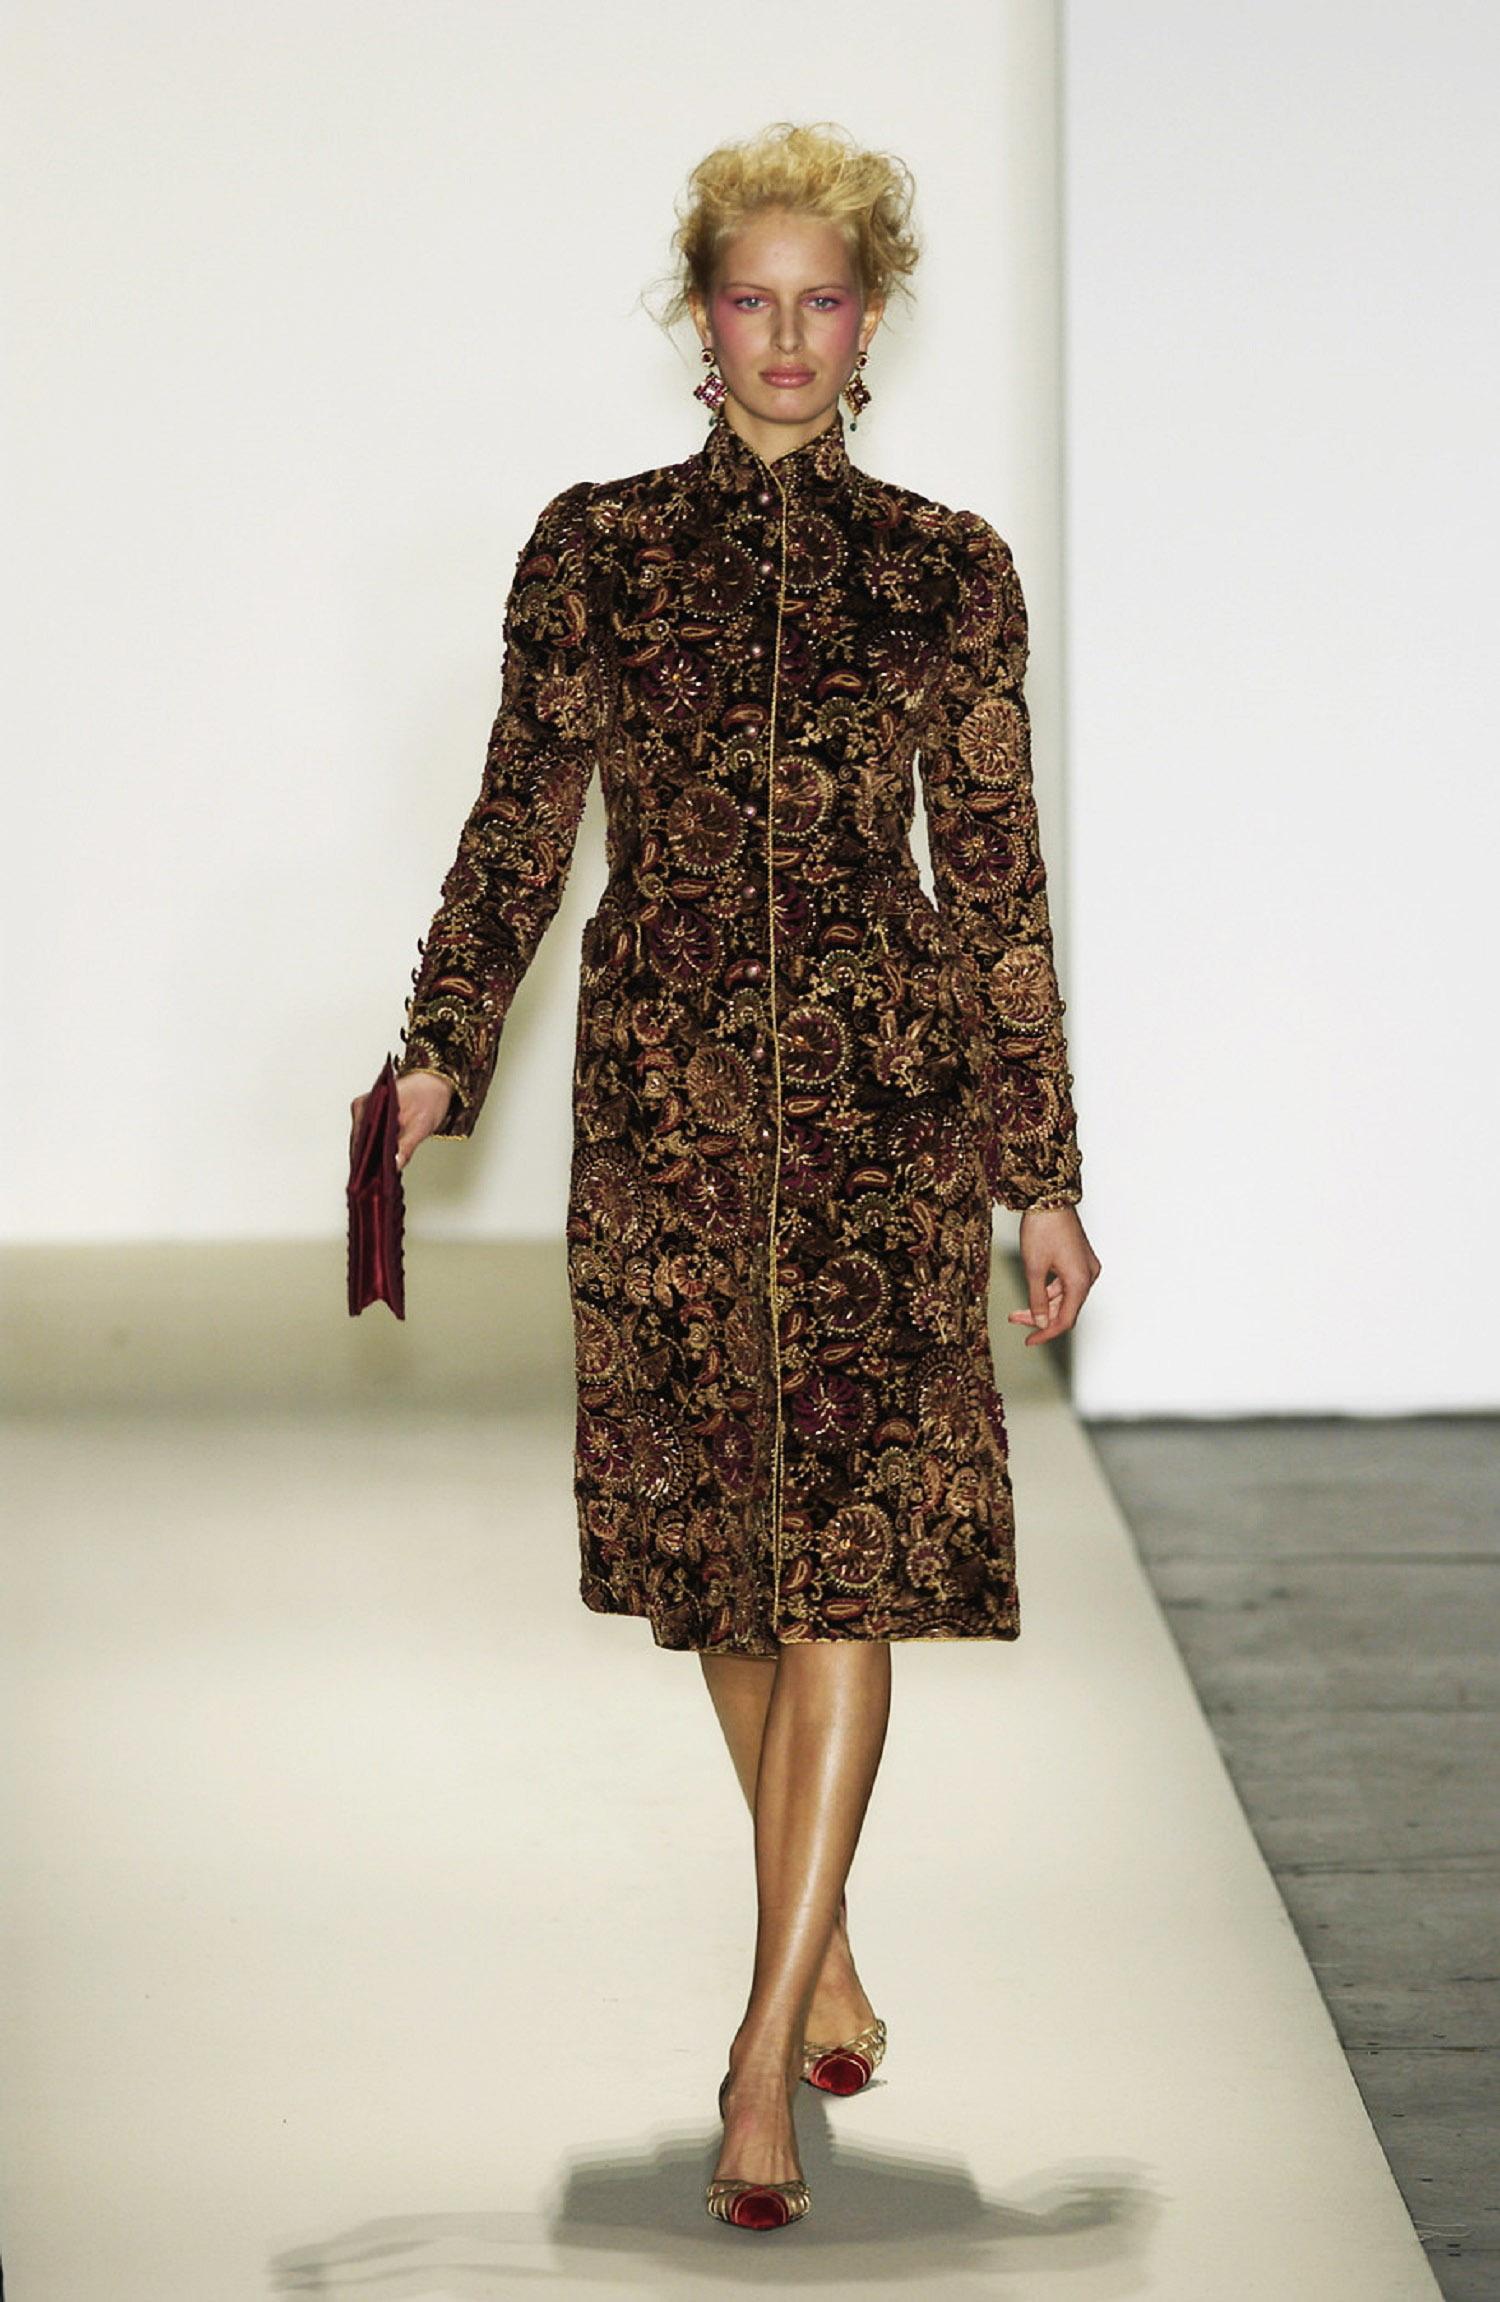 Oscar De La Renta Velvet Richly Embellished Coat
F/W 2003 Runway Collection
Size Label Missing, Please Check Measurements.
Dark Chocolate Hand - Painted Velvet, Richly Embroidered in Gold-Tone Metallic and Multicolor Threads, Beaded,  Exquisite